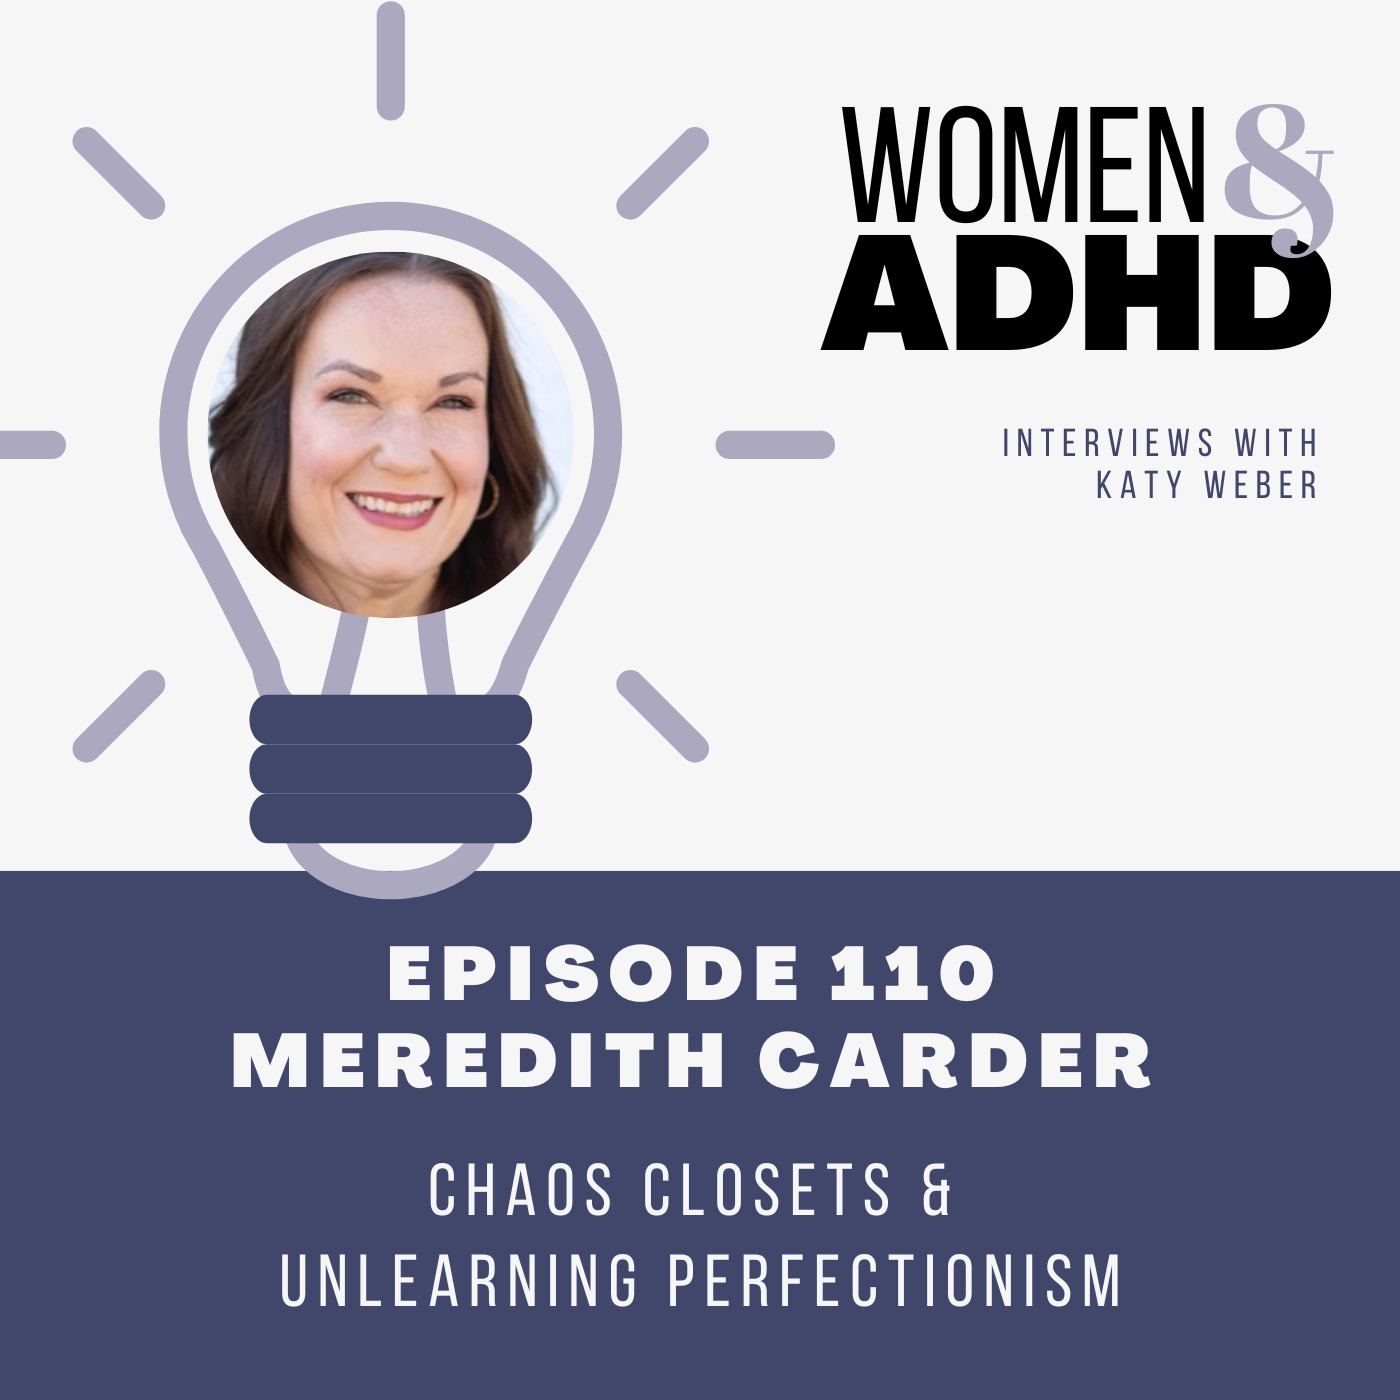 Meredith Carder: Chaos closets and unlearning perfectionism